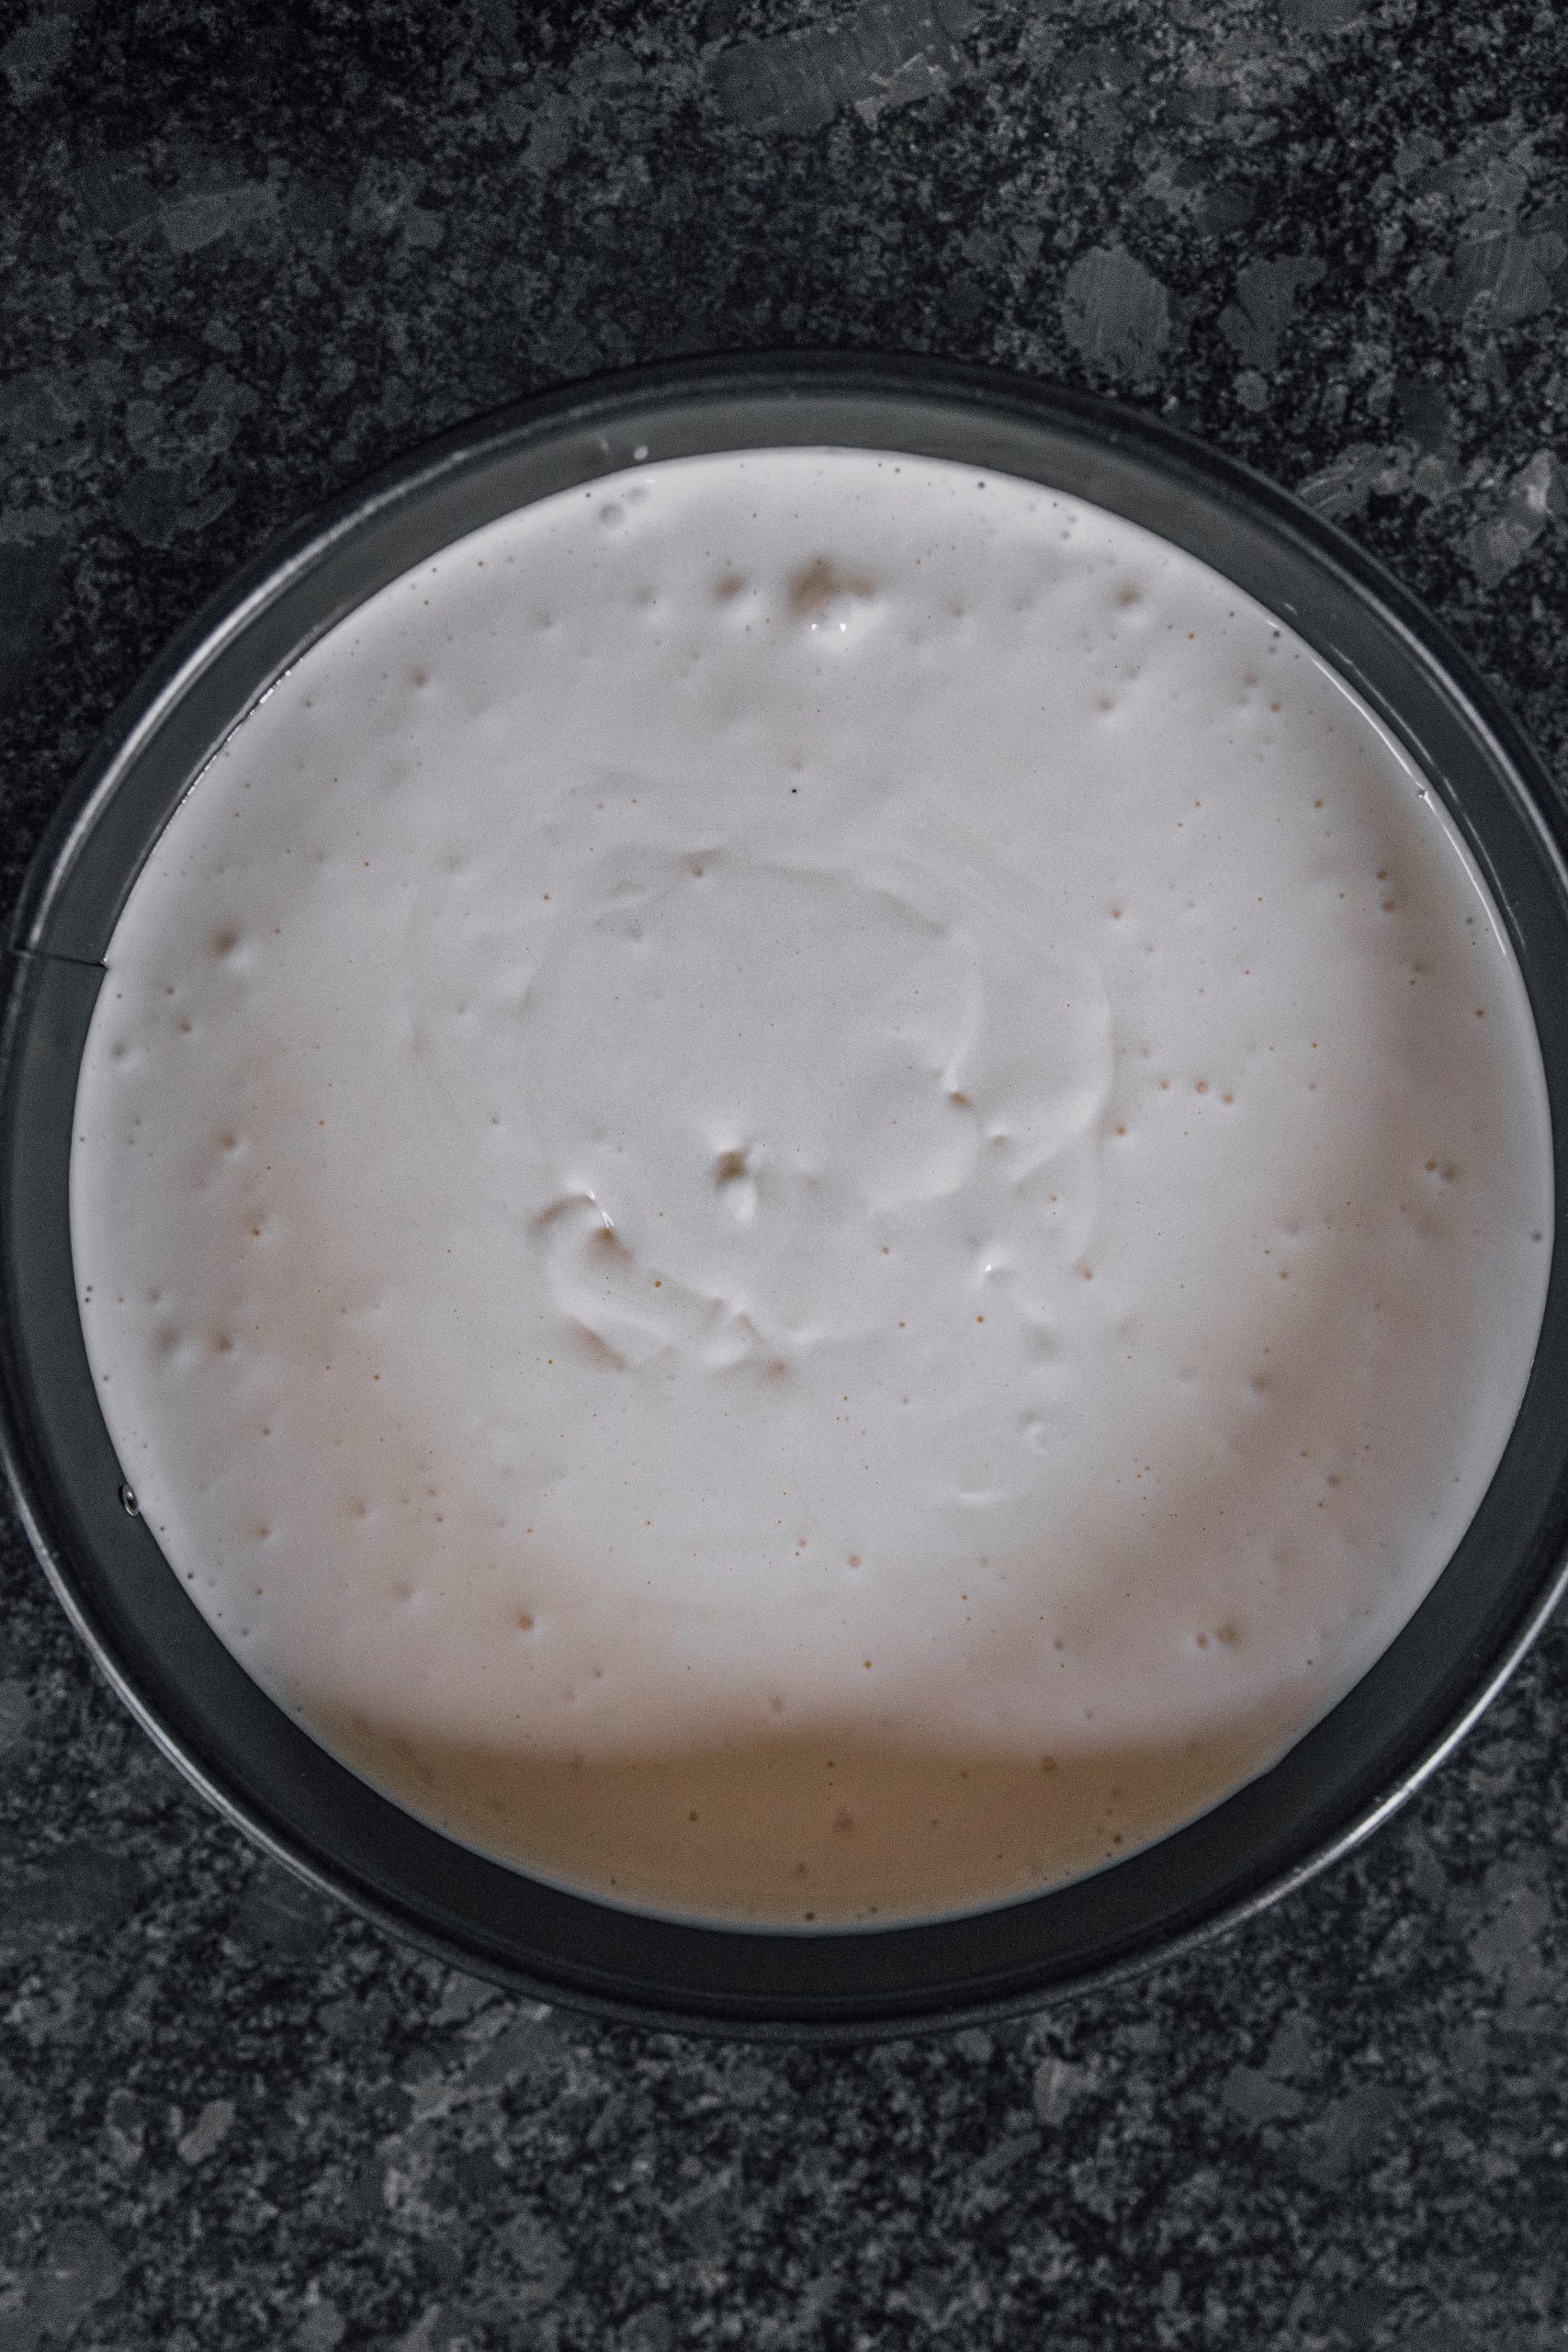  Pour the cheesecake mixture into the pan on top of the graham cracker base. 